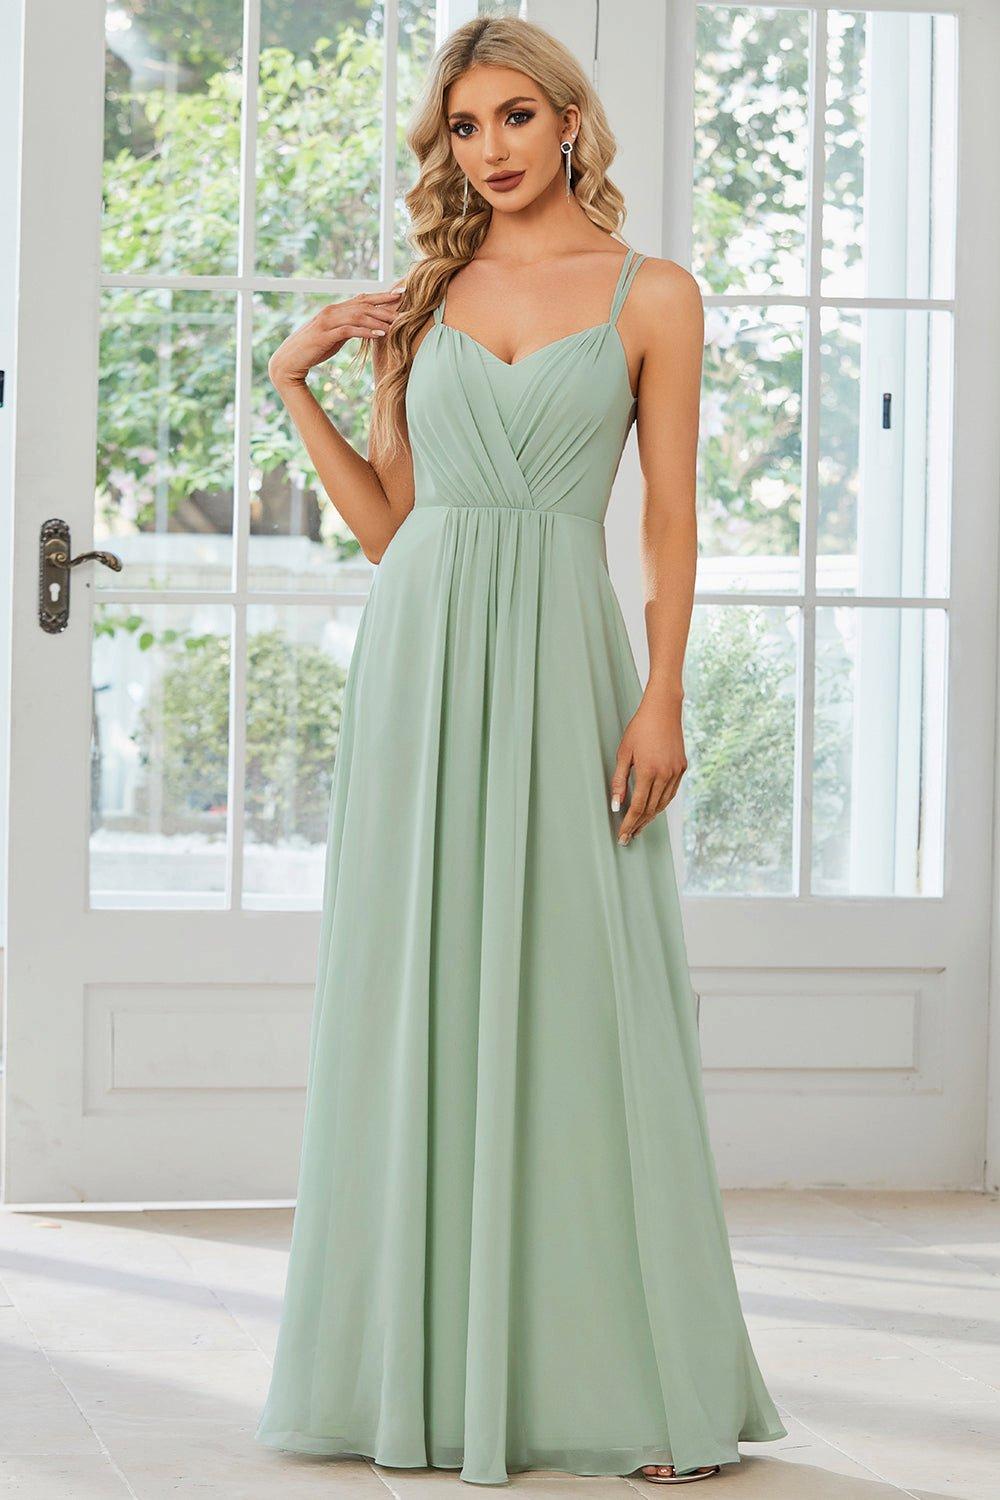 Dresses, Chiffon and Lace Open Back Bridesmaid Dress with Spaghetti Straps